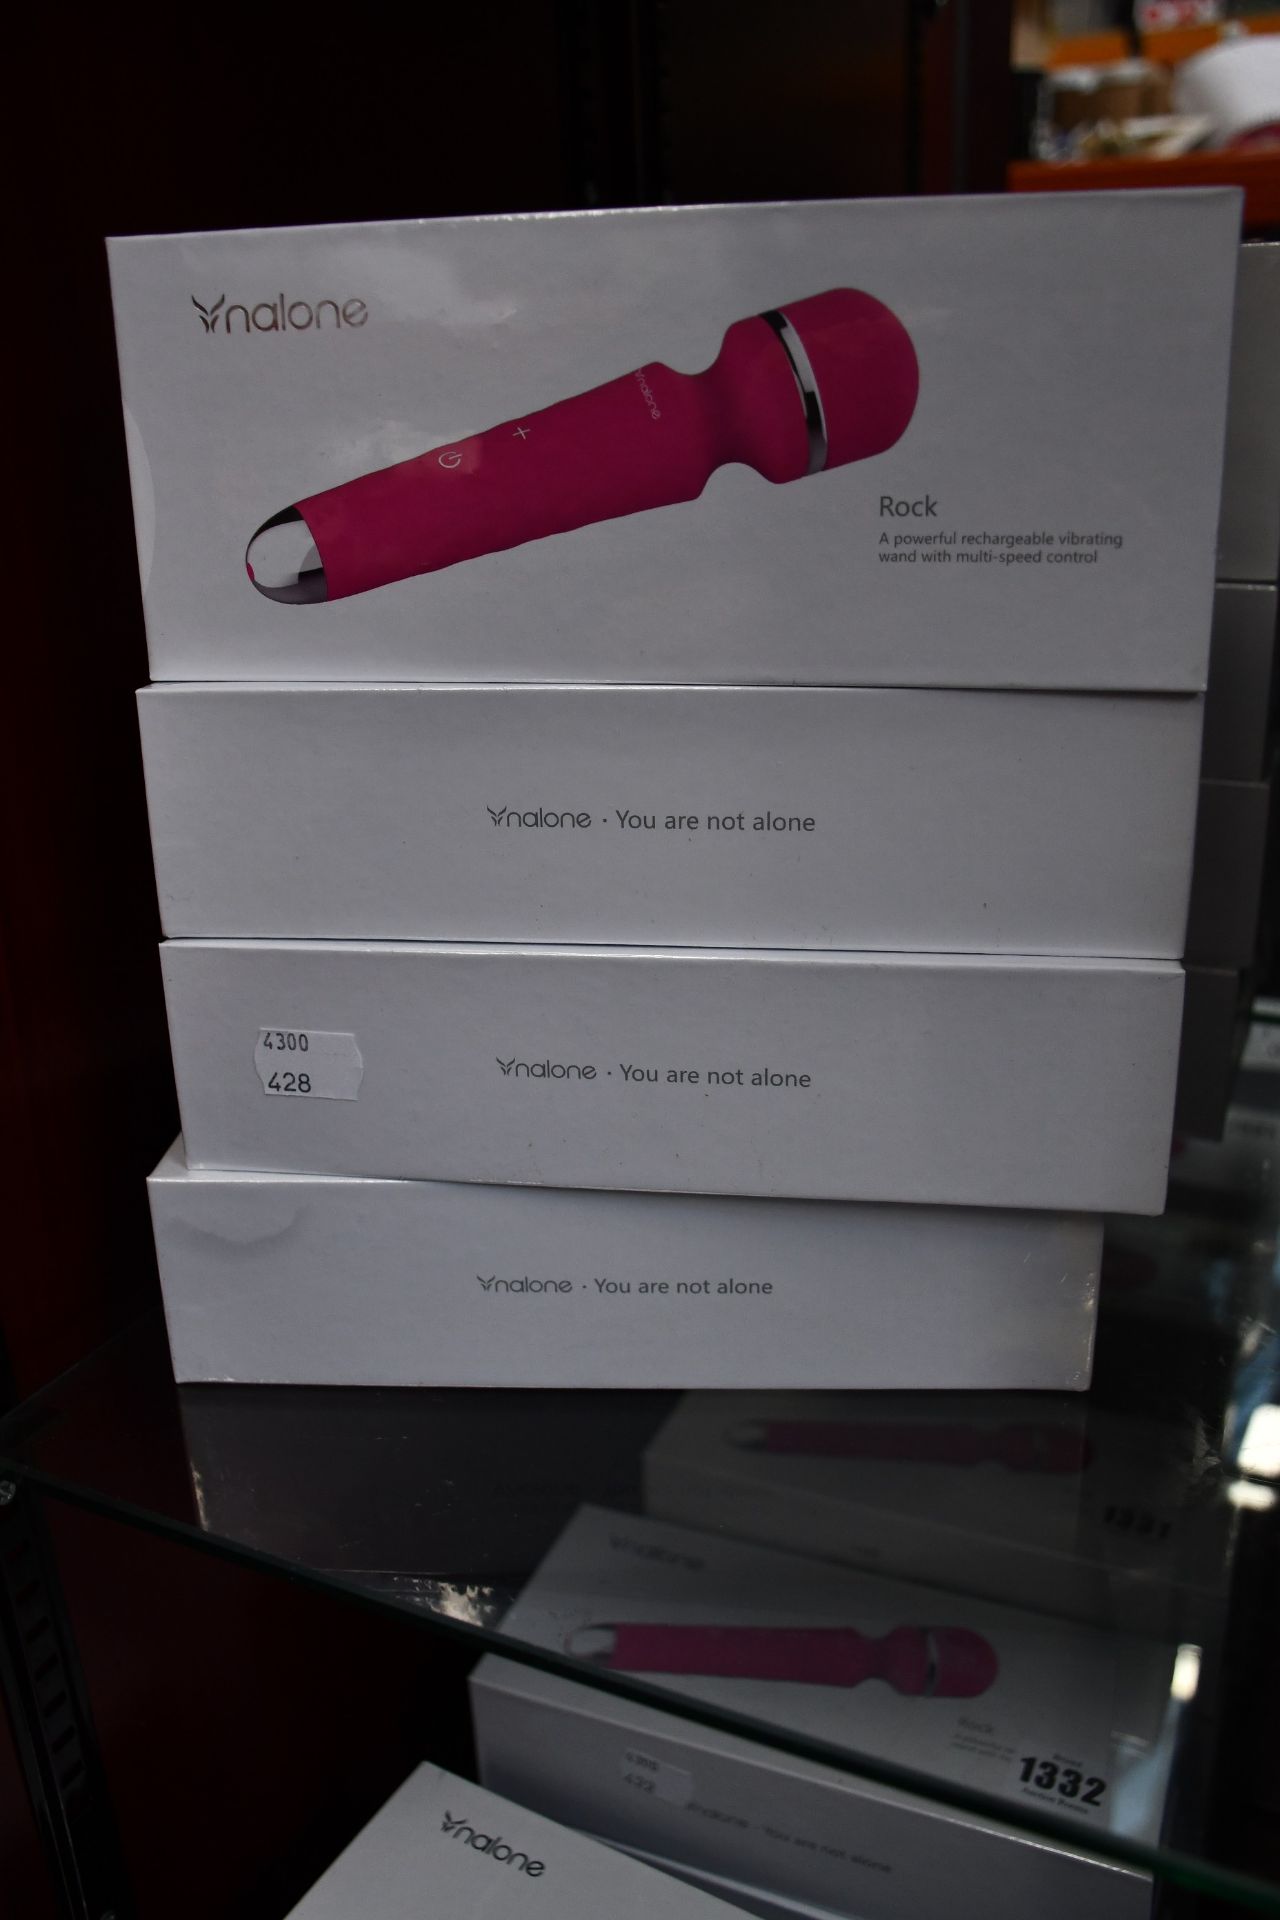 Four boxed as new Nalone Rock Wall Massagers in pink (A powerful rechargeable vibrating wand with